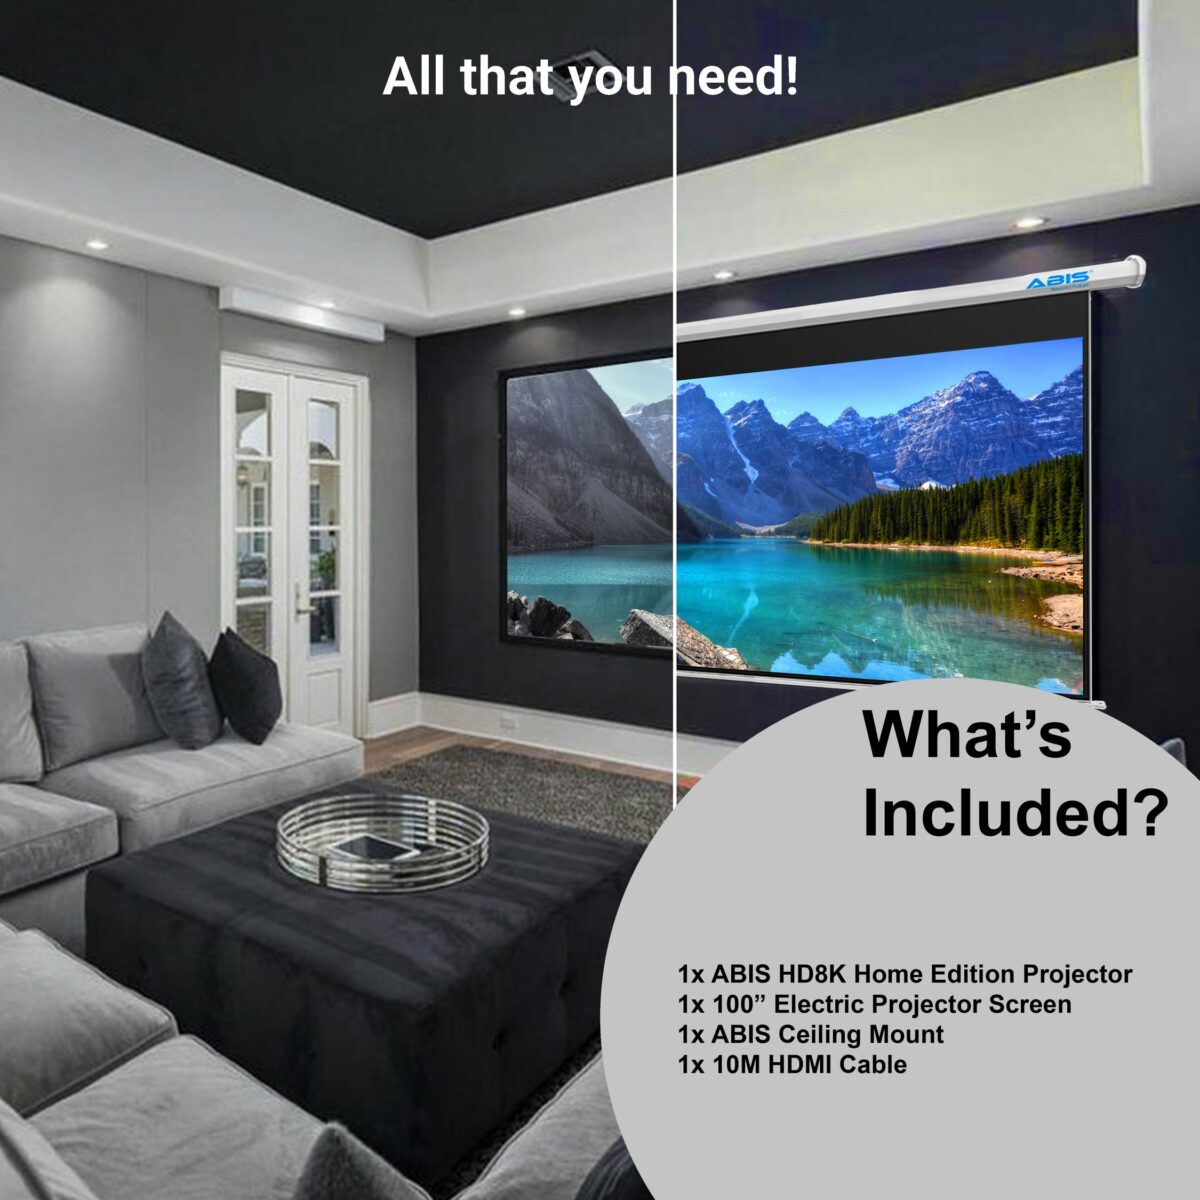 100" Electric Projector Screen & Projector  Bundle with Android TV Stick for Home - Complete Set - ABIS